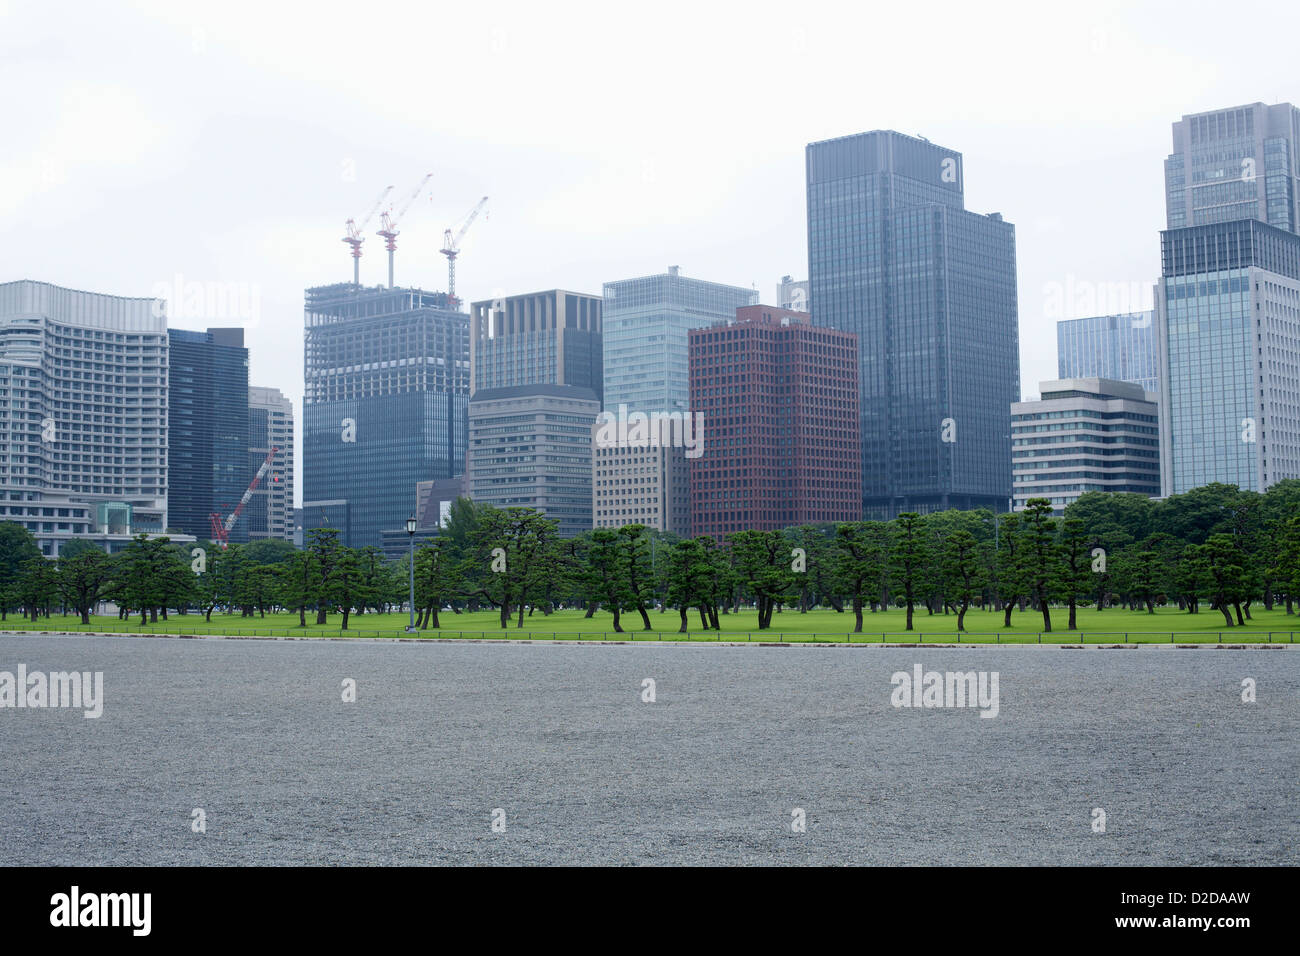 Skyscrapers in marunouchi business district viewed from outer gardens of Imperial Palace, Tokyo Stock Photo